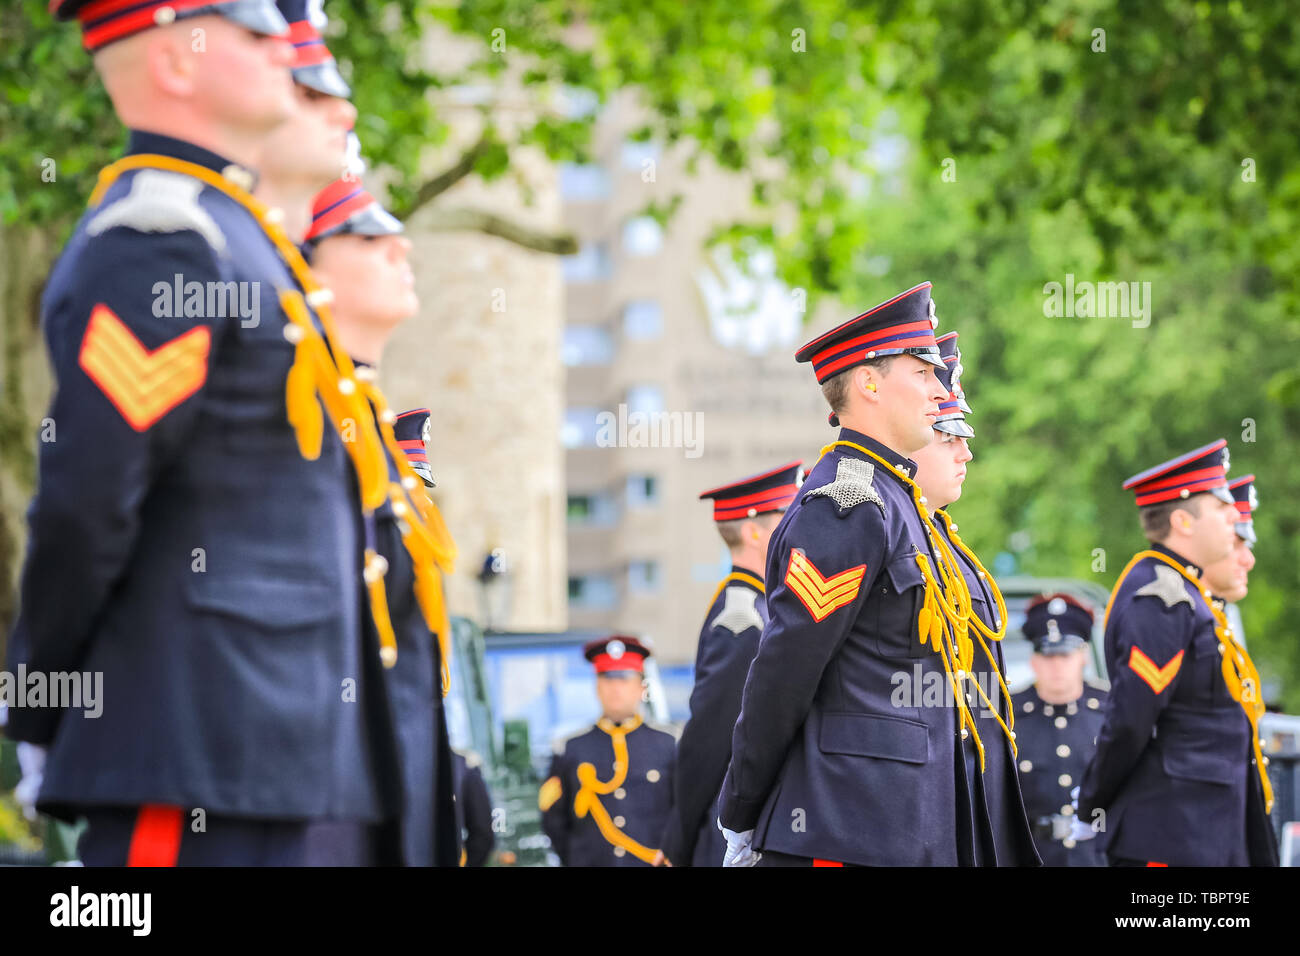 London, UK, 03rd June 2019. A 103 round gun salute by the Honourable Artillery Company at HM Tower of London is fired at midday. The 103 rounds are:  41 to mark 66 years since HM The Queen’s coronation, 41 to mark the state visit of the President of the United States, and 21 for the City of London. Credit: Imageplotter/Alamy Live News Stock Photo